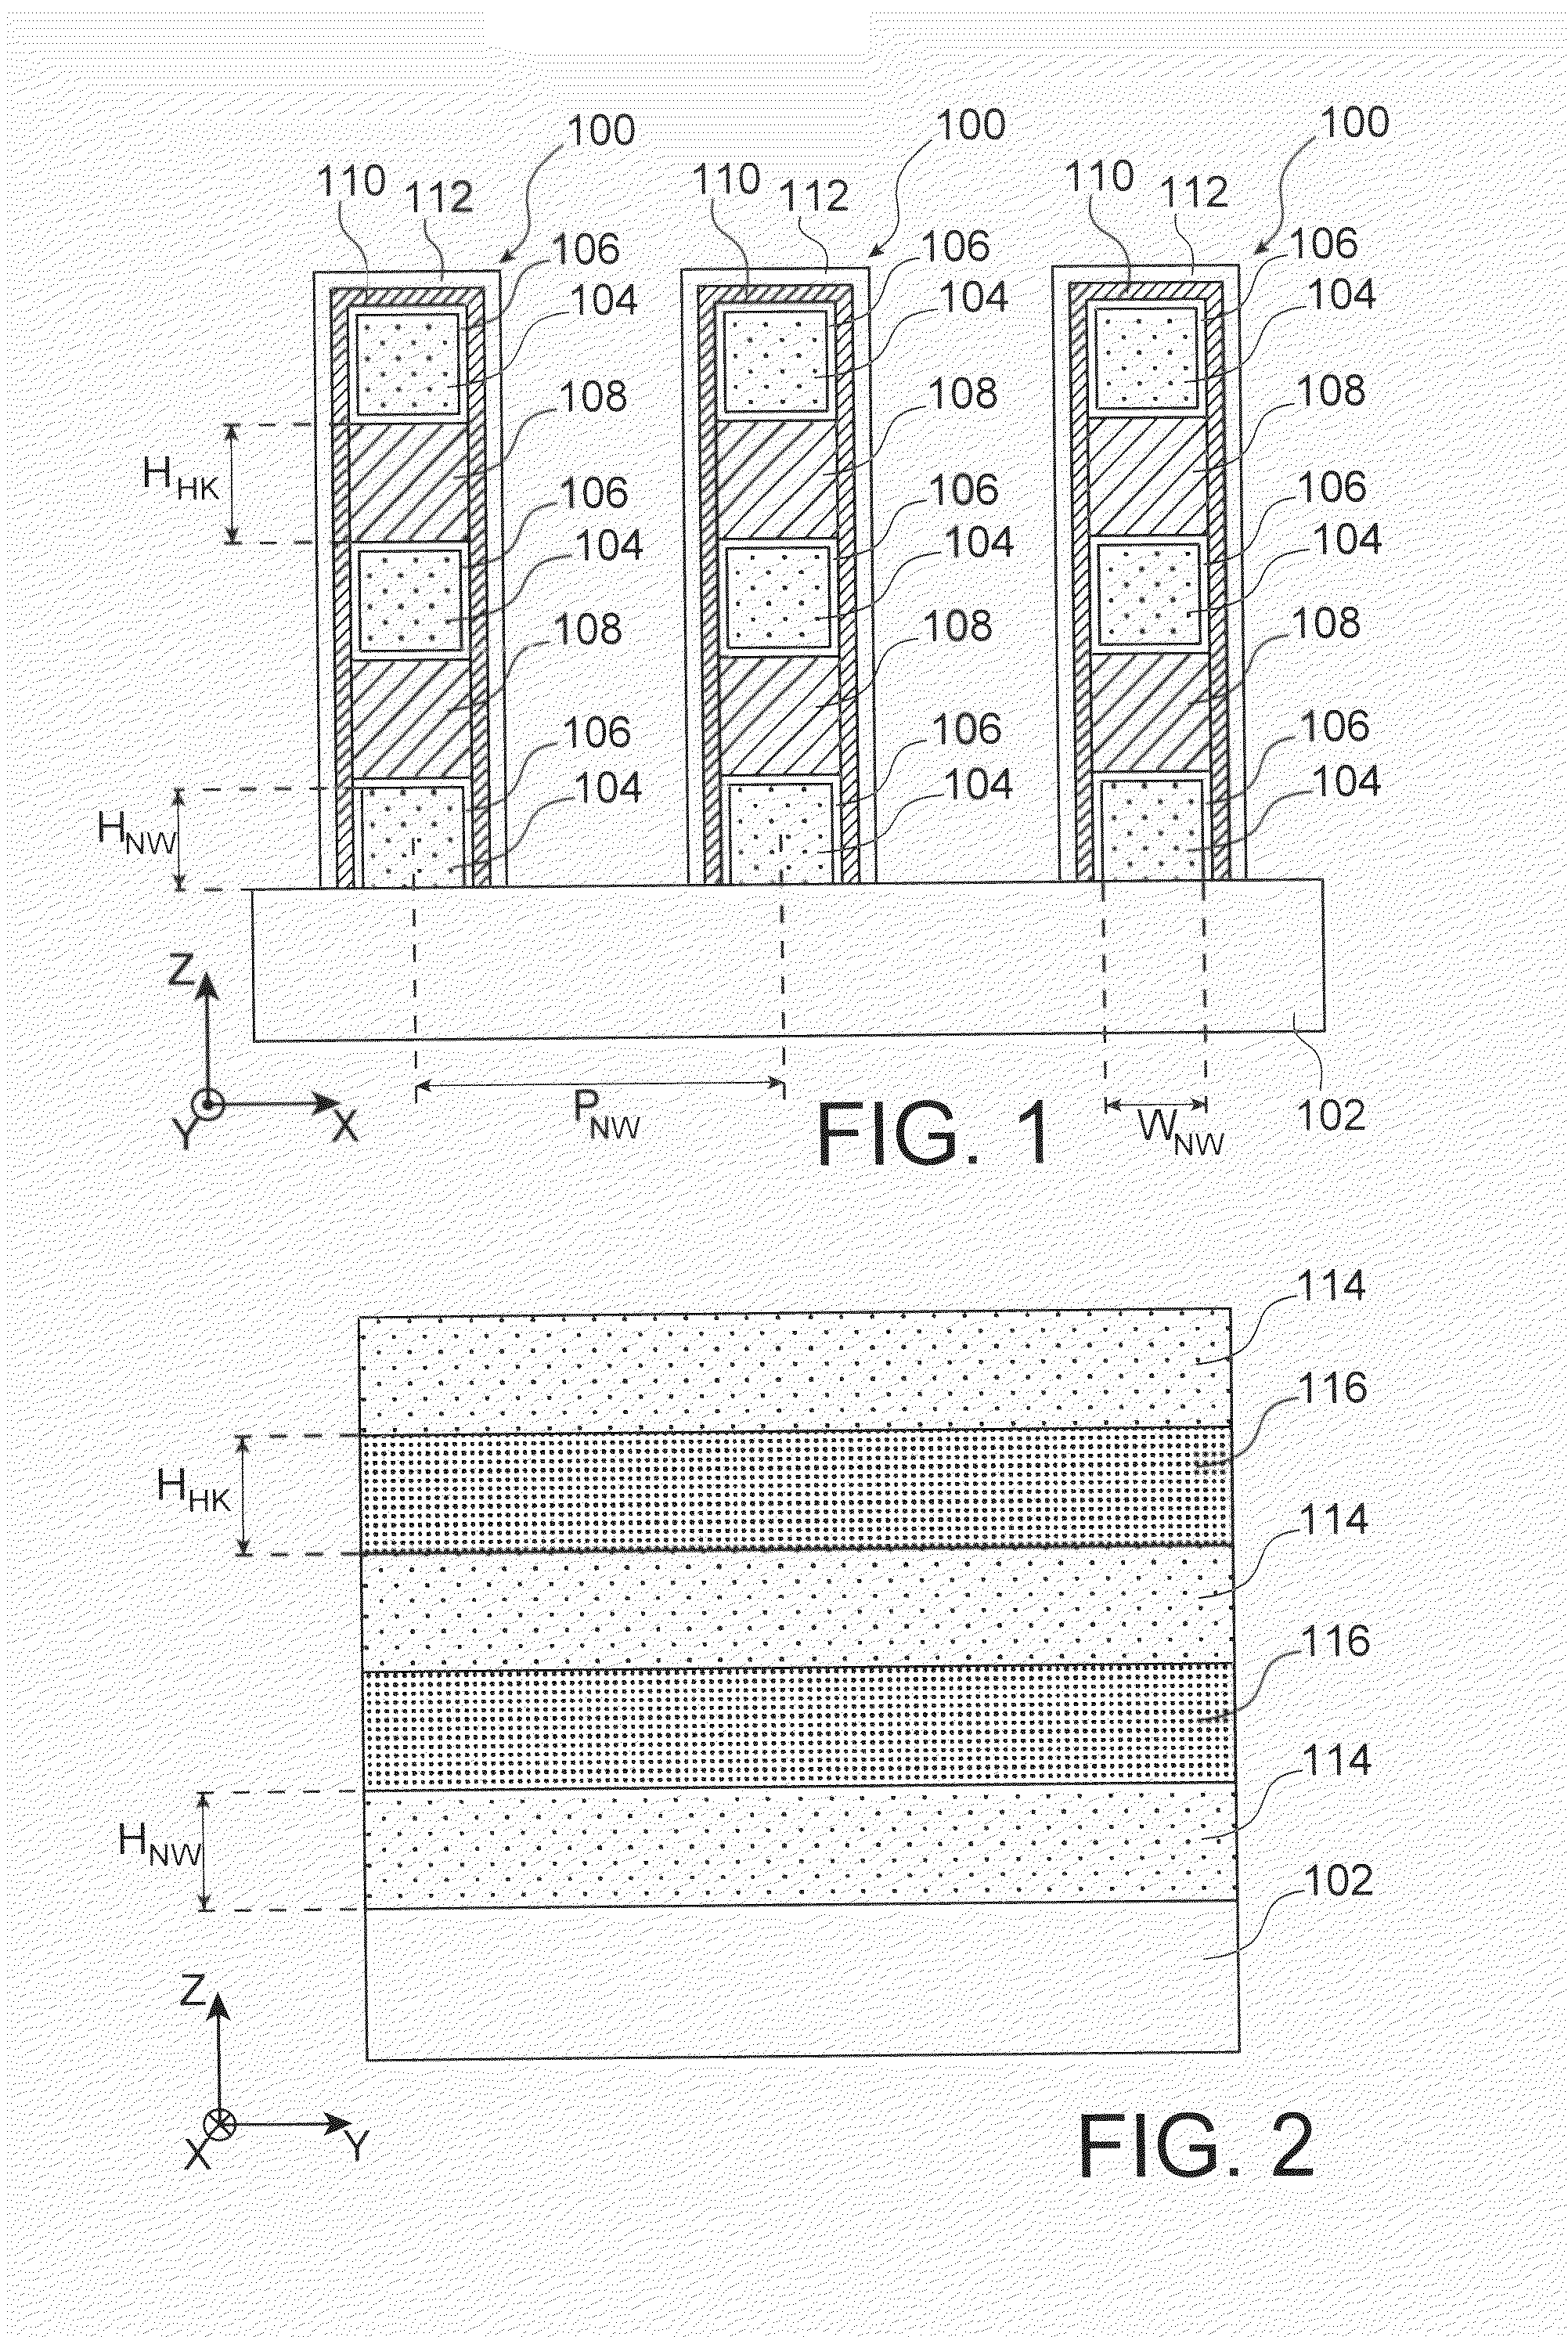 Nanowire semiconductor device partially surrounded by a grating